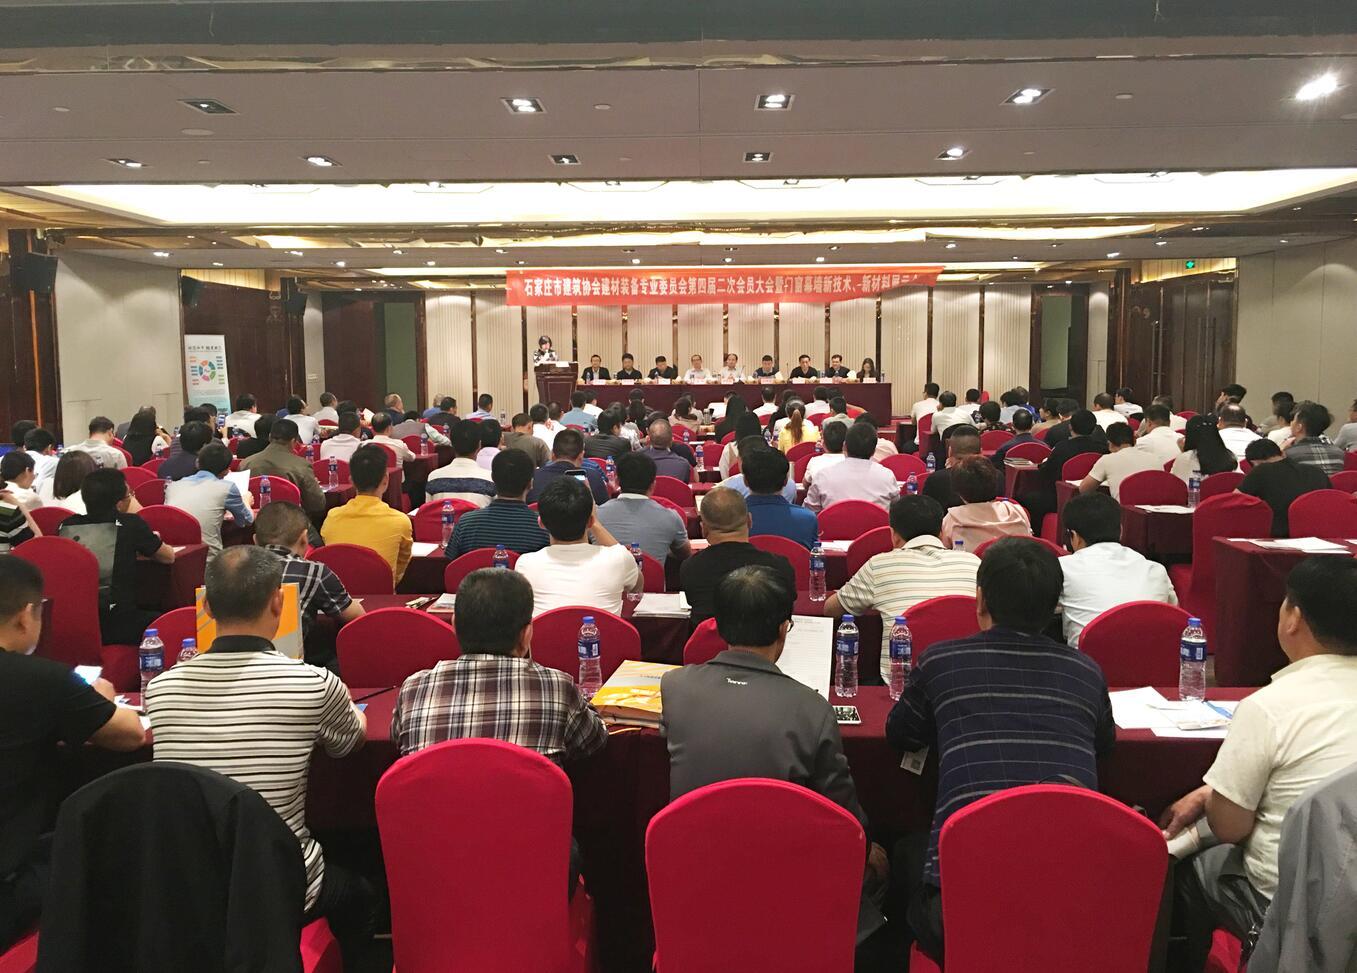 Kemet Company was invited to participate in the fourth second member meeting of the Building Materials and Equipment Professional Committee of Shijiazhuang Construction Association and the exhibition of new technologies and materials for doors, windows and curtain walls.